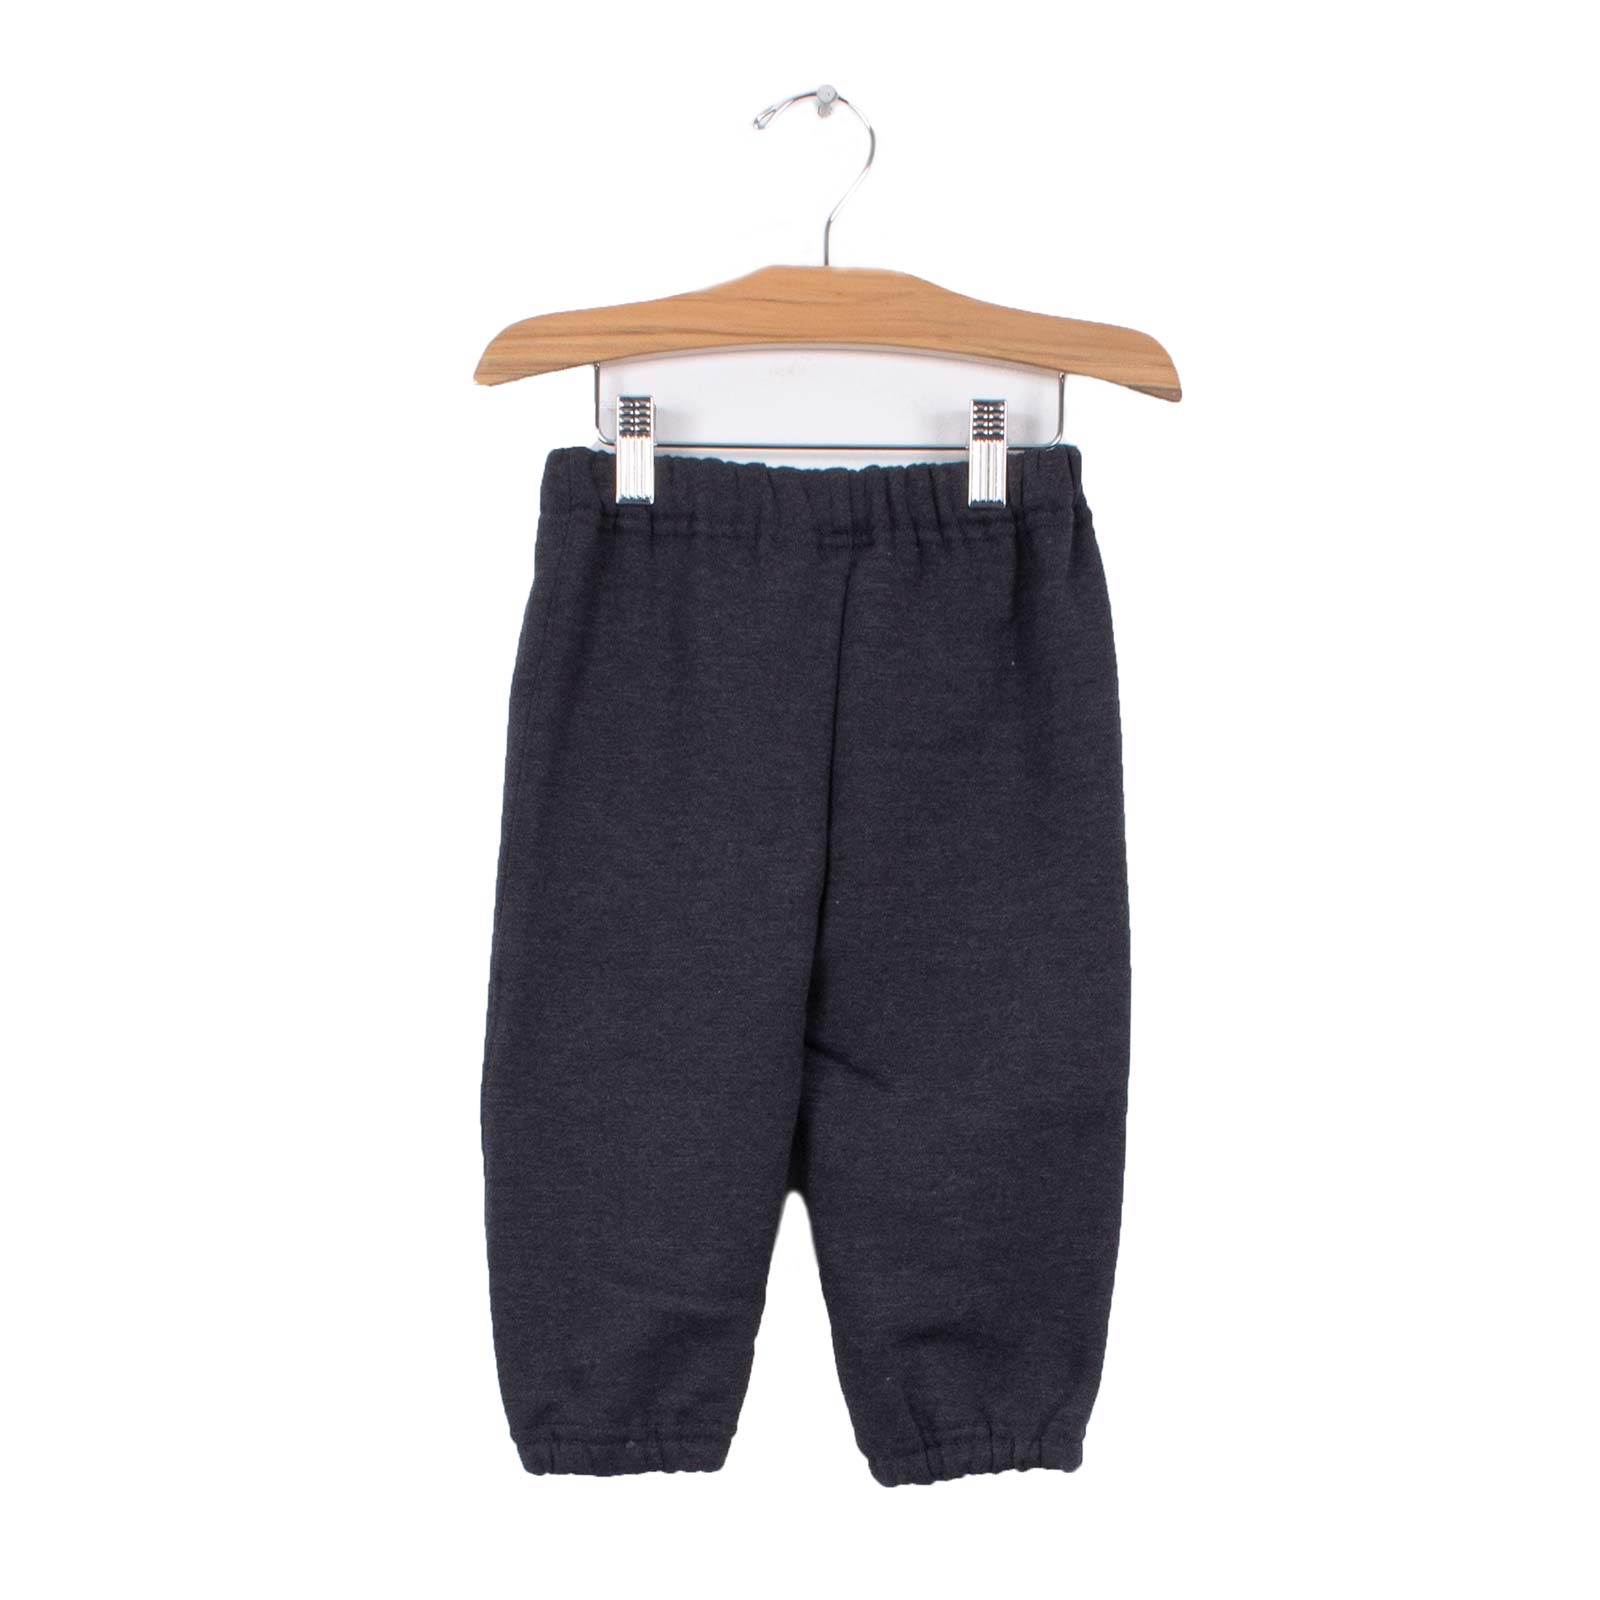 USC Arch Toddler TT Pant Oxford image51